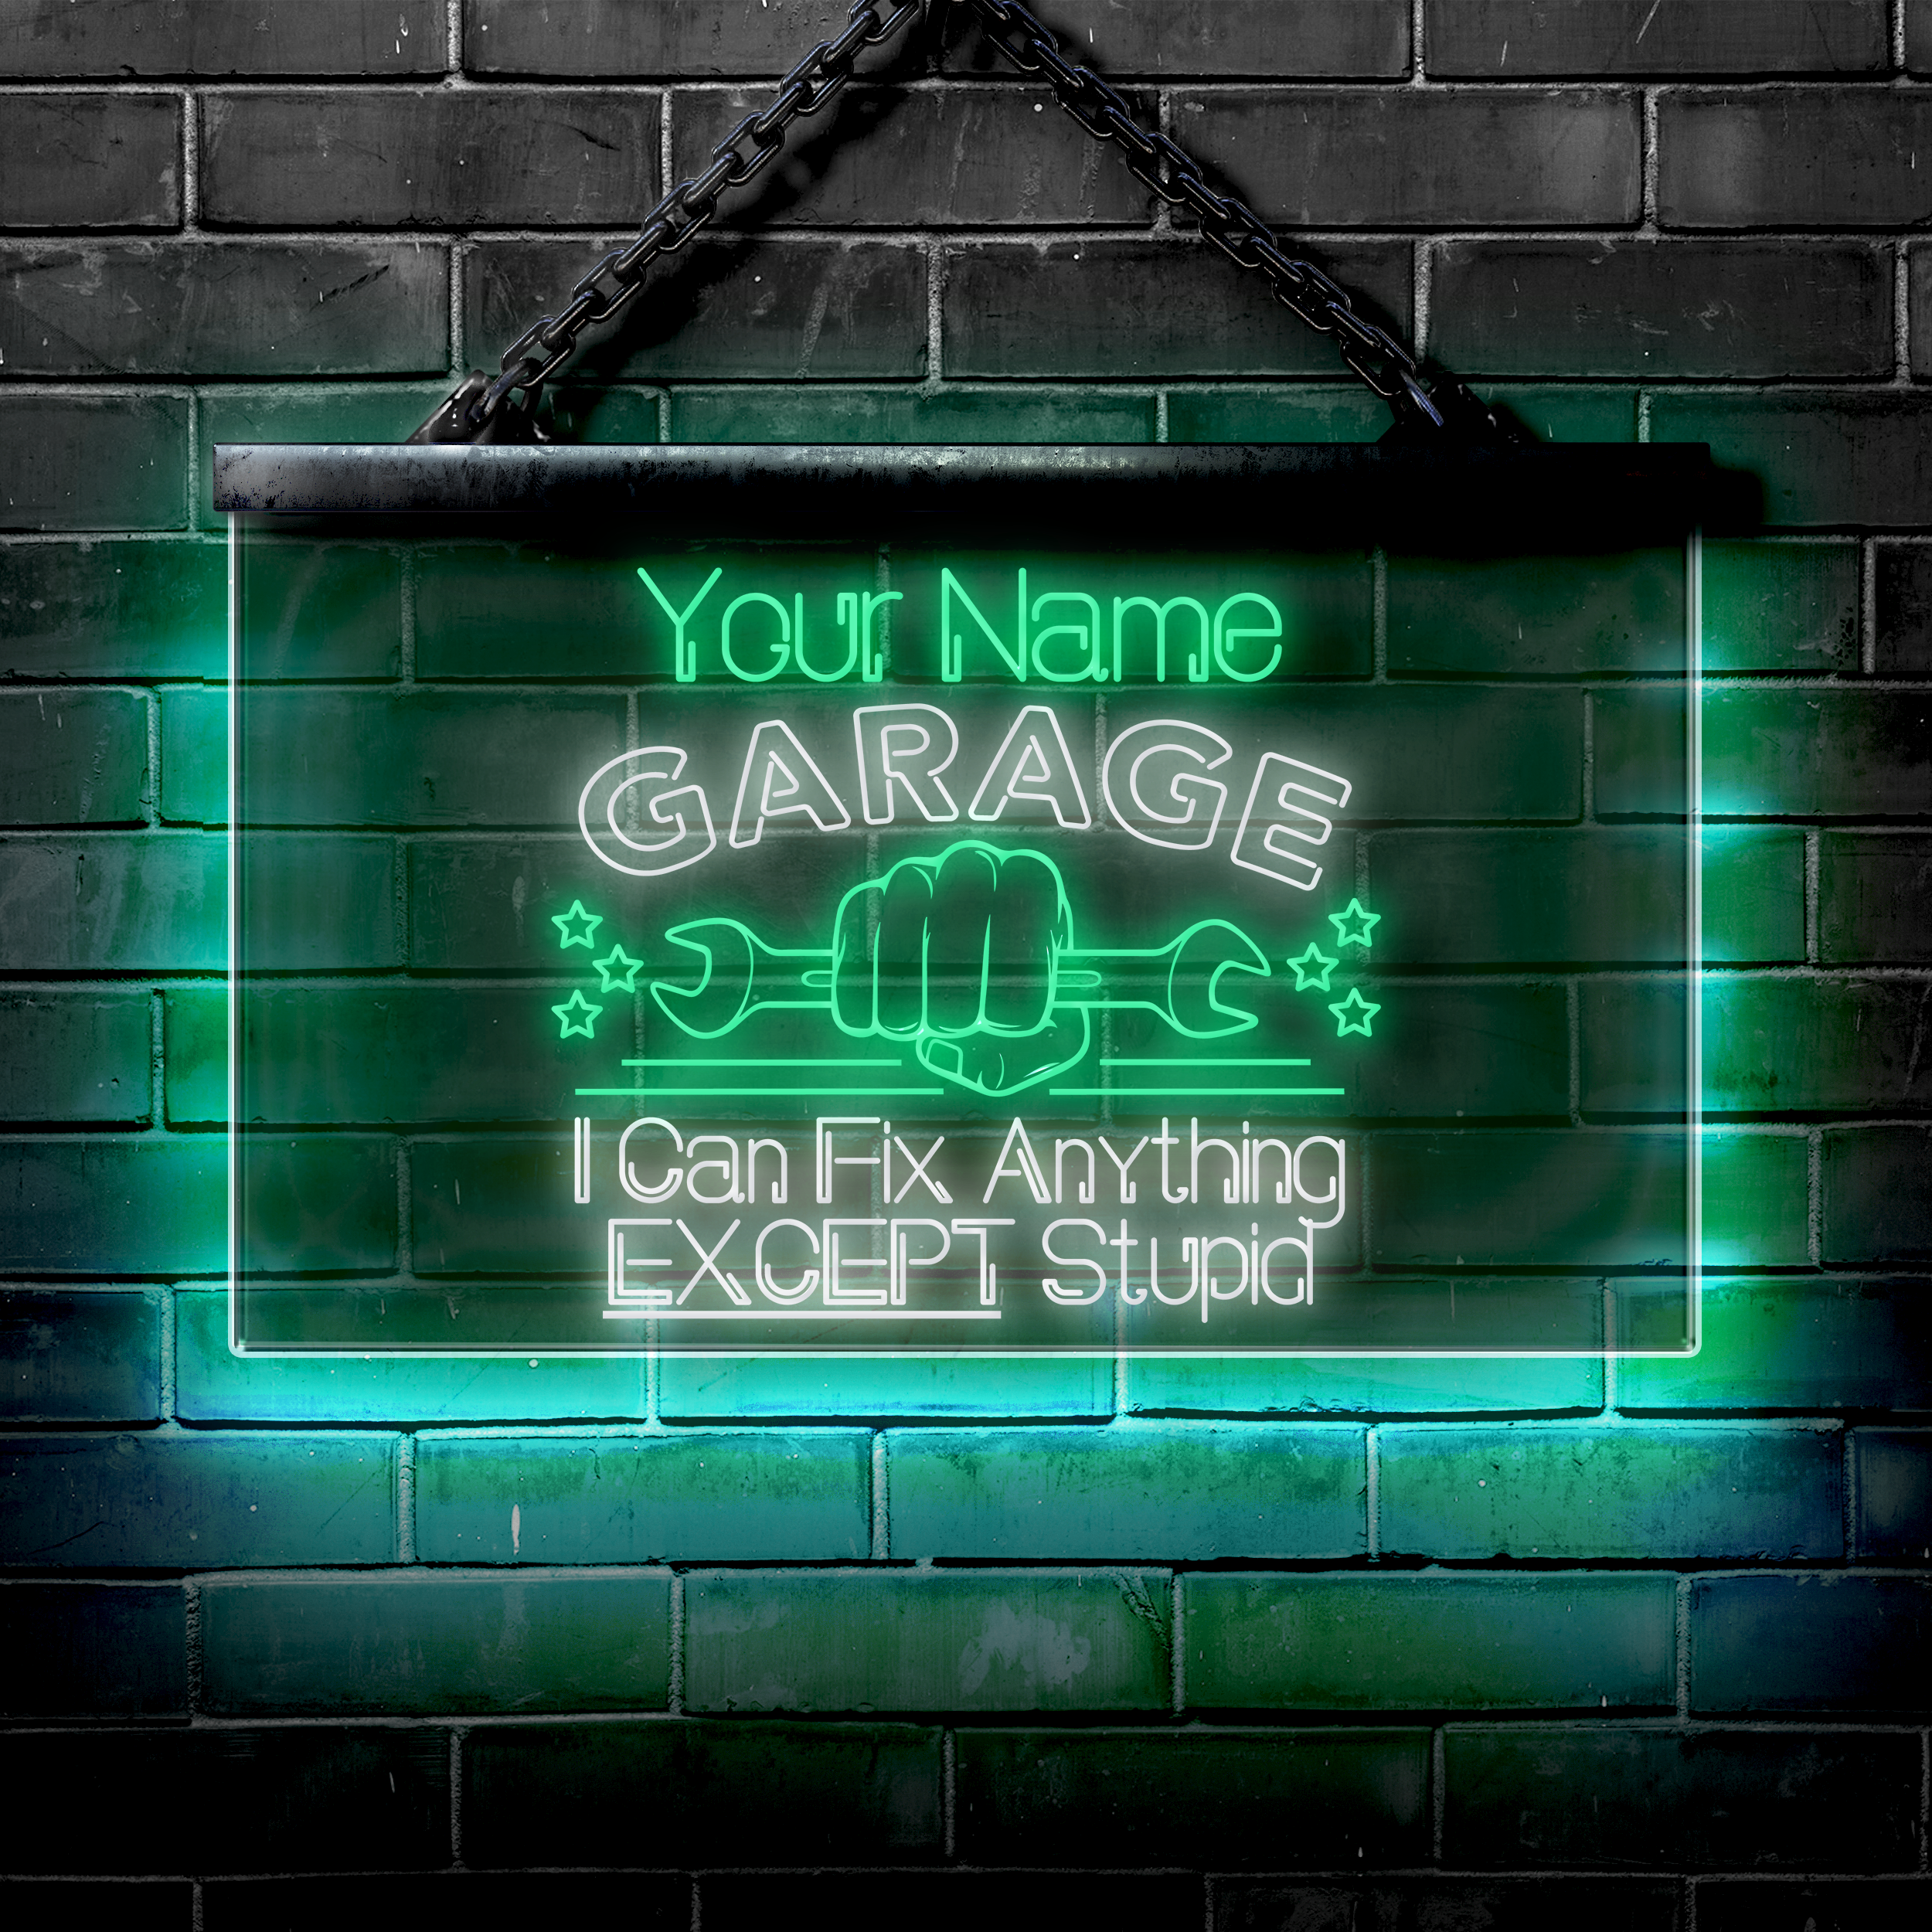 Personalized LED Garage Sign: I Can Fix Anything EXCEPT Stupid - NeonFerry